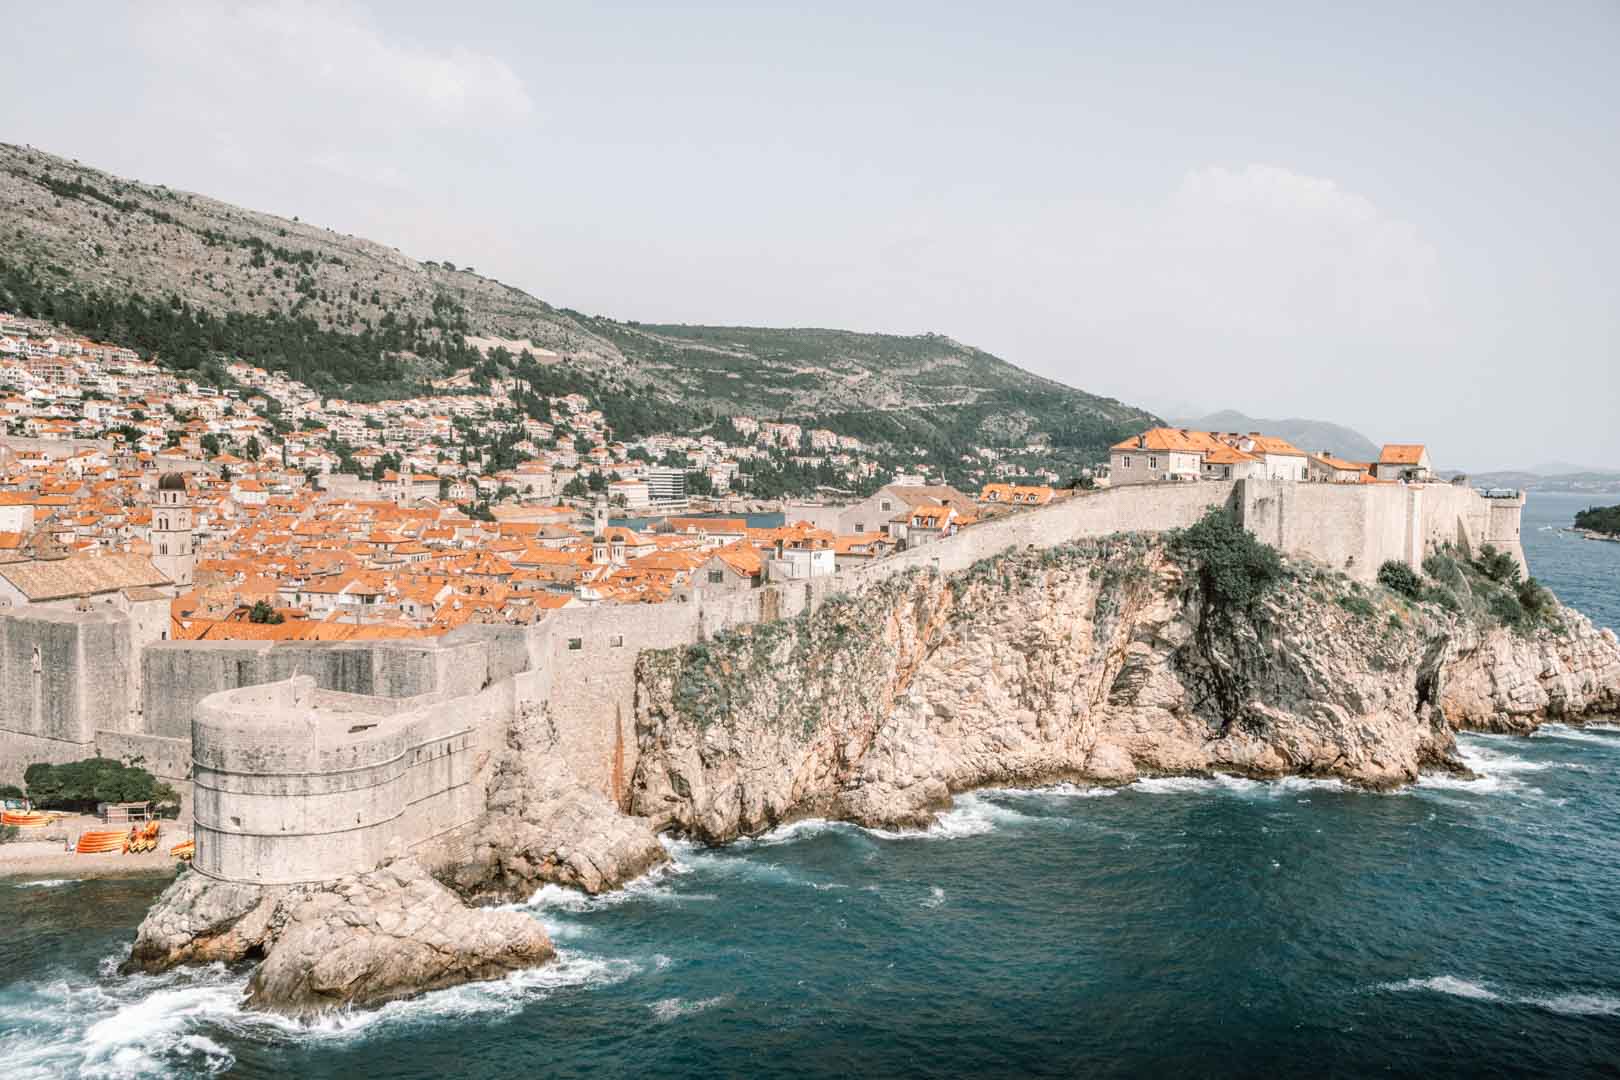 One Day In Dubrovnik: How To Spend 24 Hours In The City!